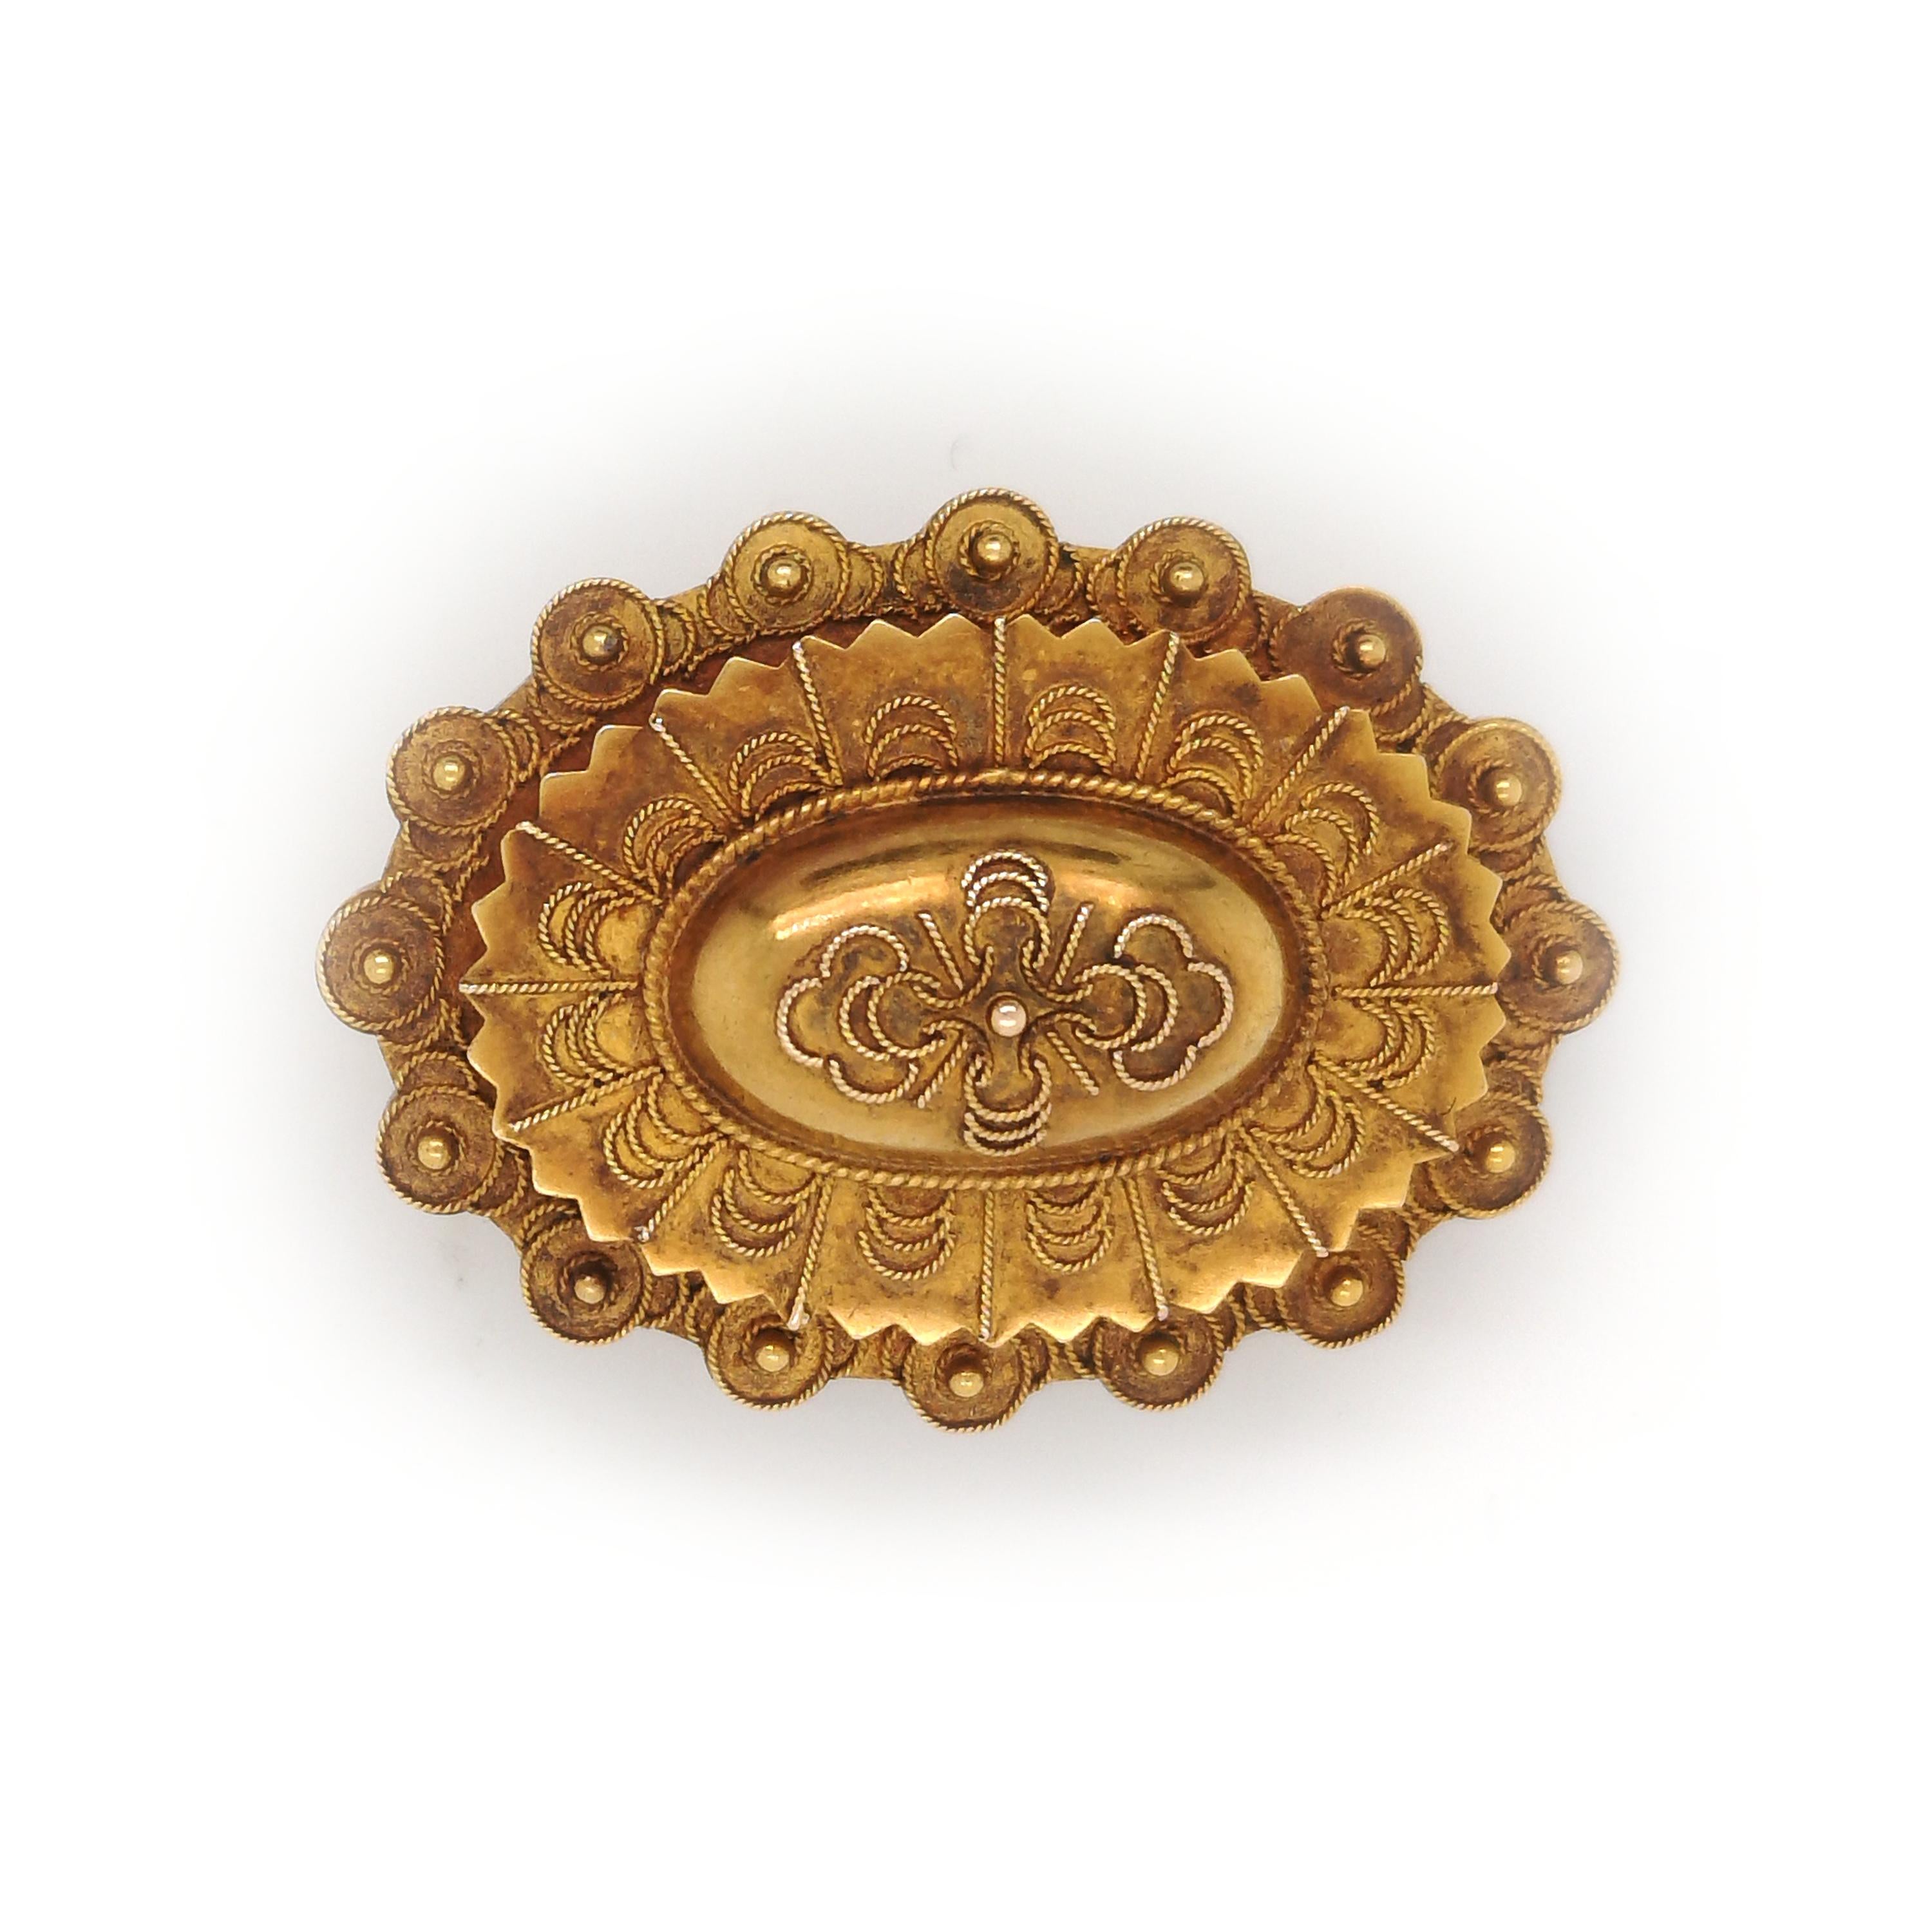 A Victorian, Etruscan style brooch and earrings suite, comprising an oval brooch, with three layers, with a central dome, all decorated with Etruscan style wire work, with a loop on the back for hanging a pendant and a pin and hook catch,